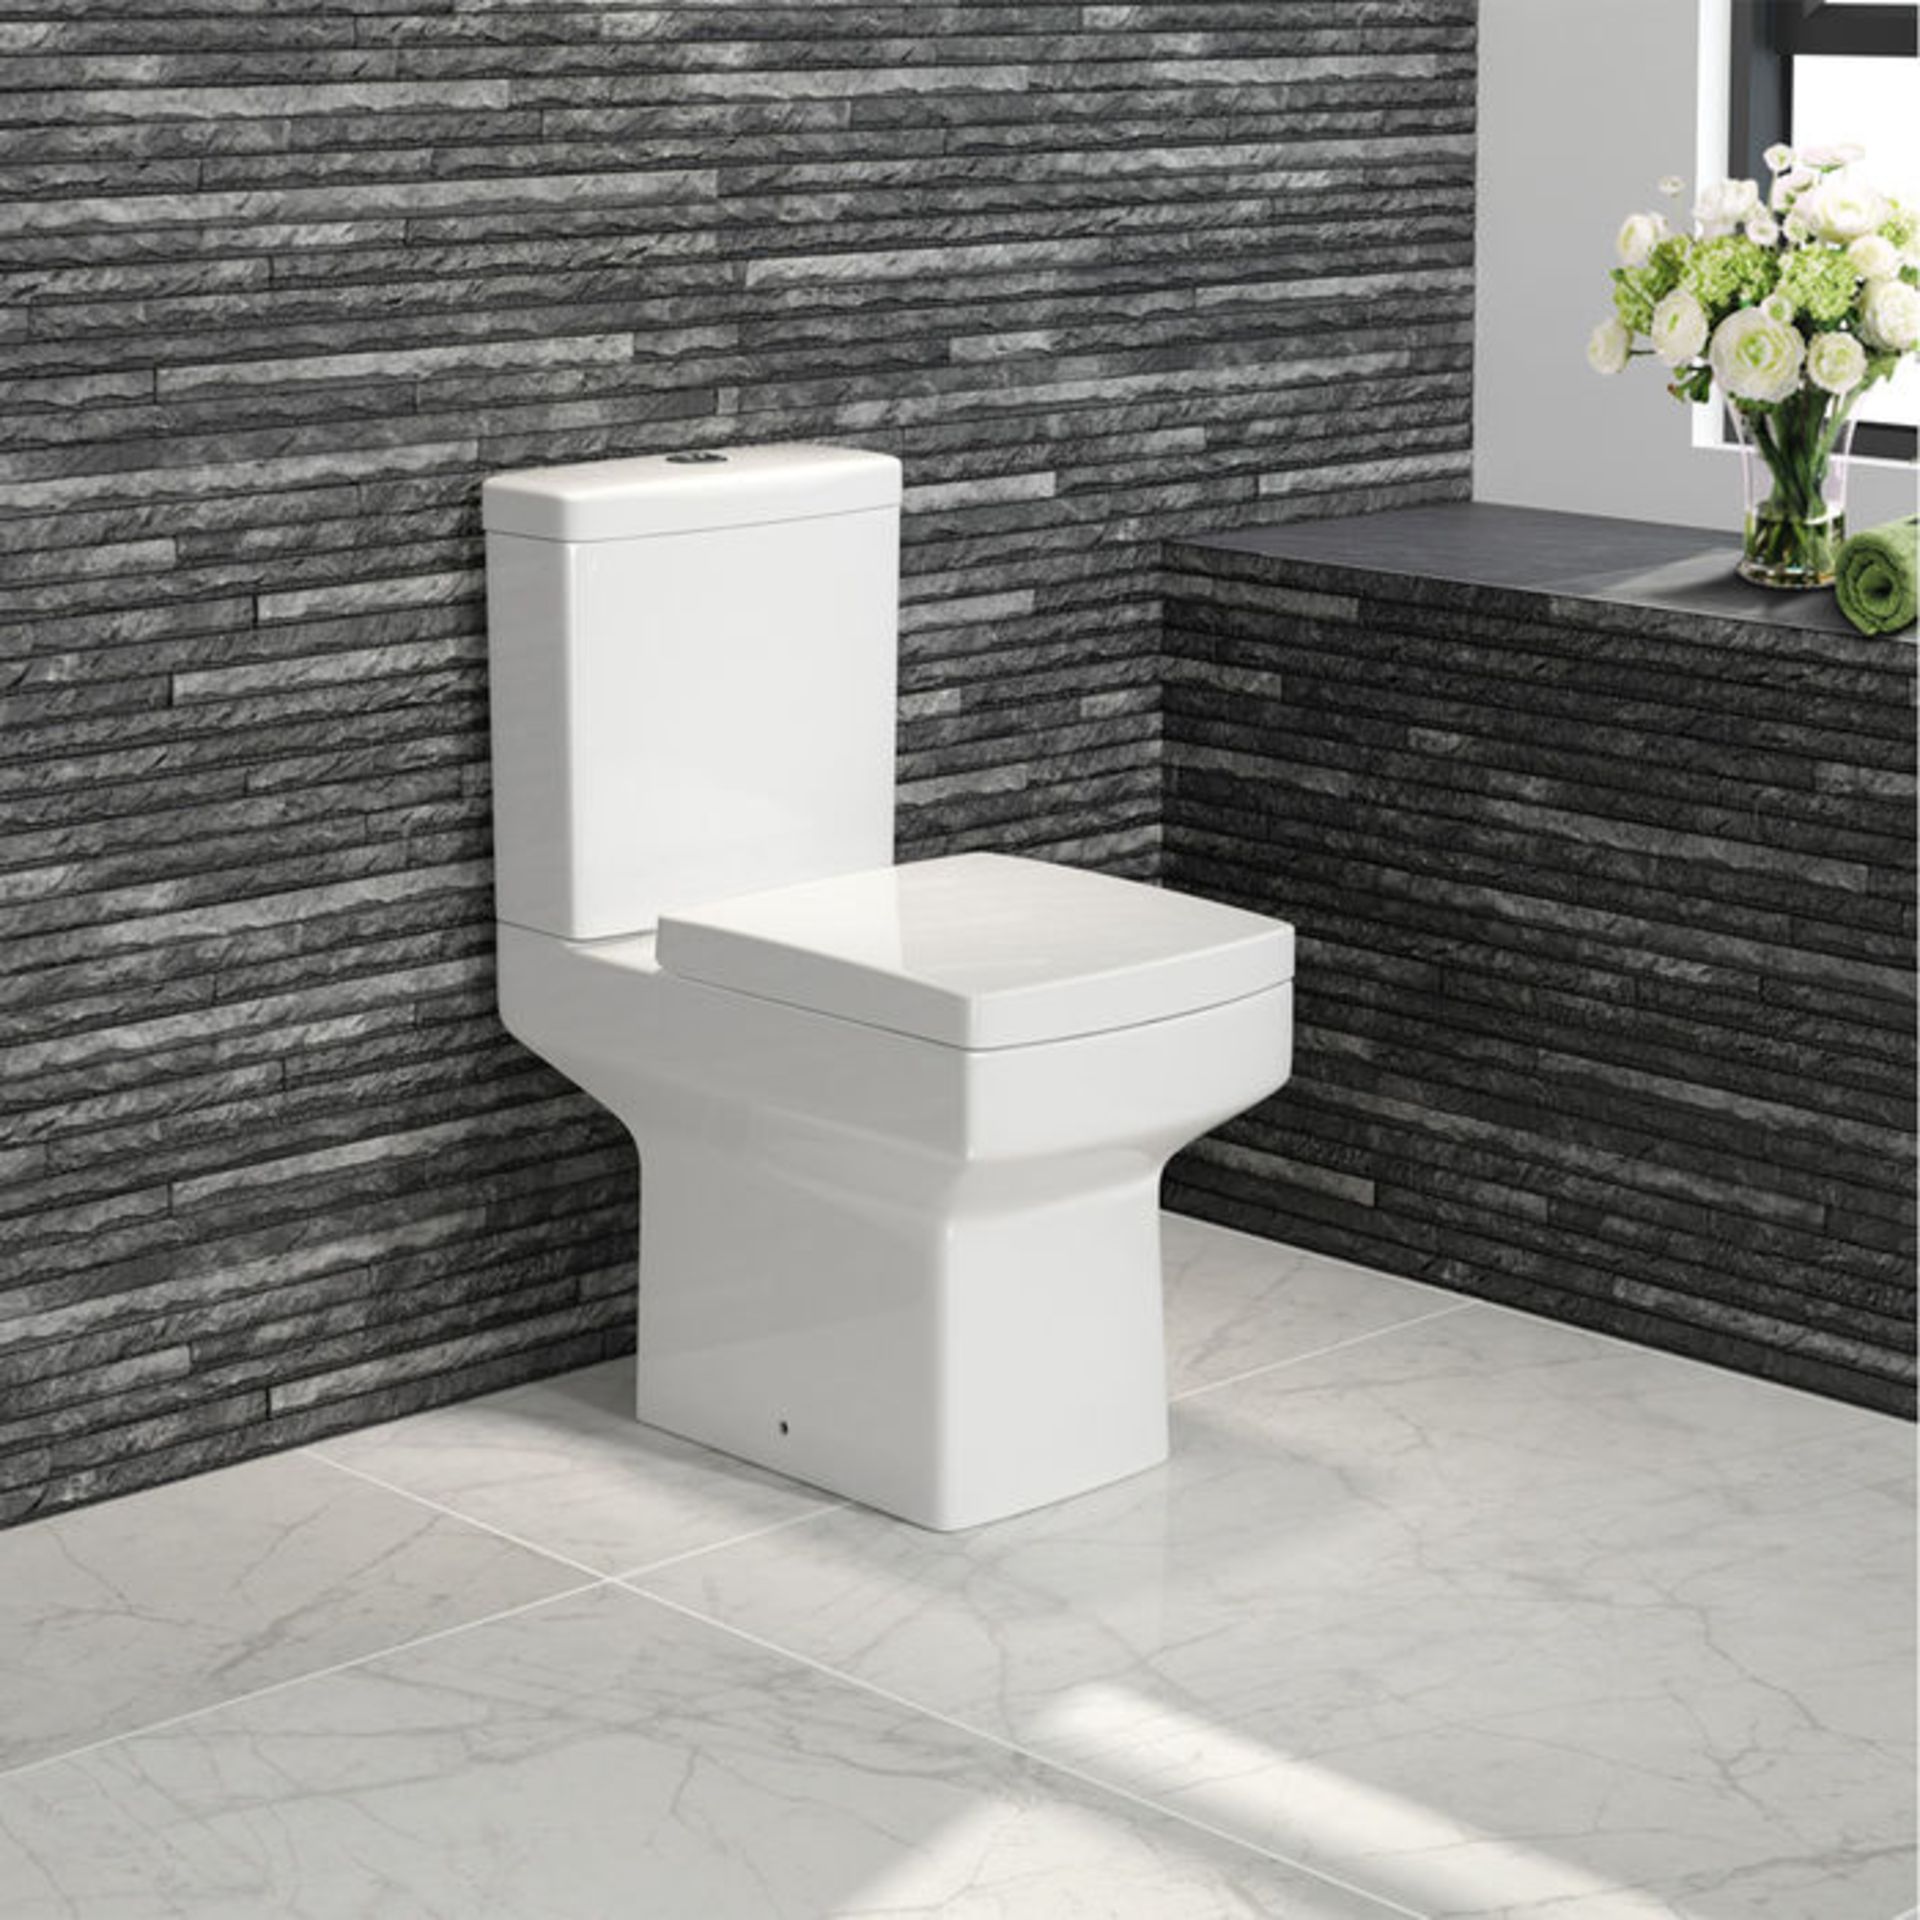 (PA25) Belfort Close Coupled Toilet & Cistern inc Soft Close Seat. Made from White Vitreous China - Image 2 of 5